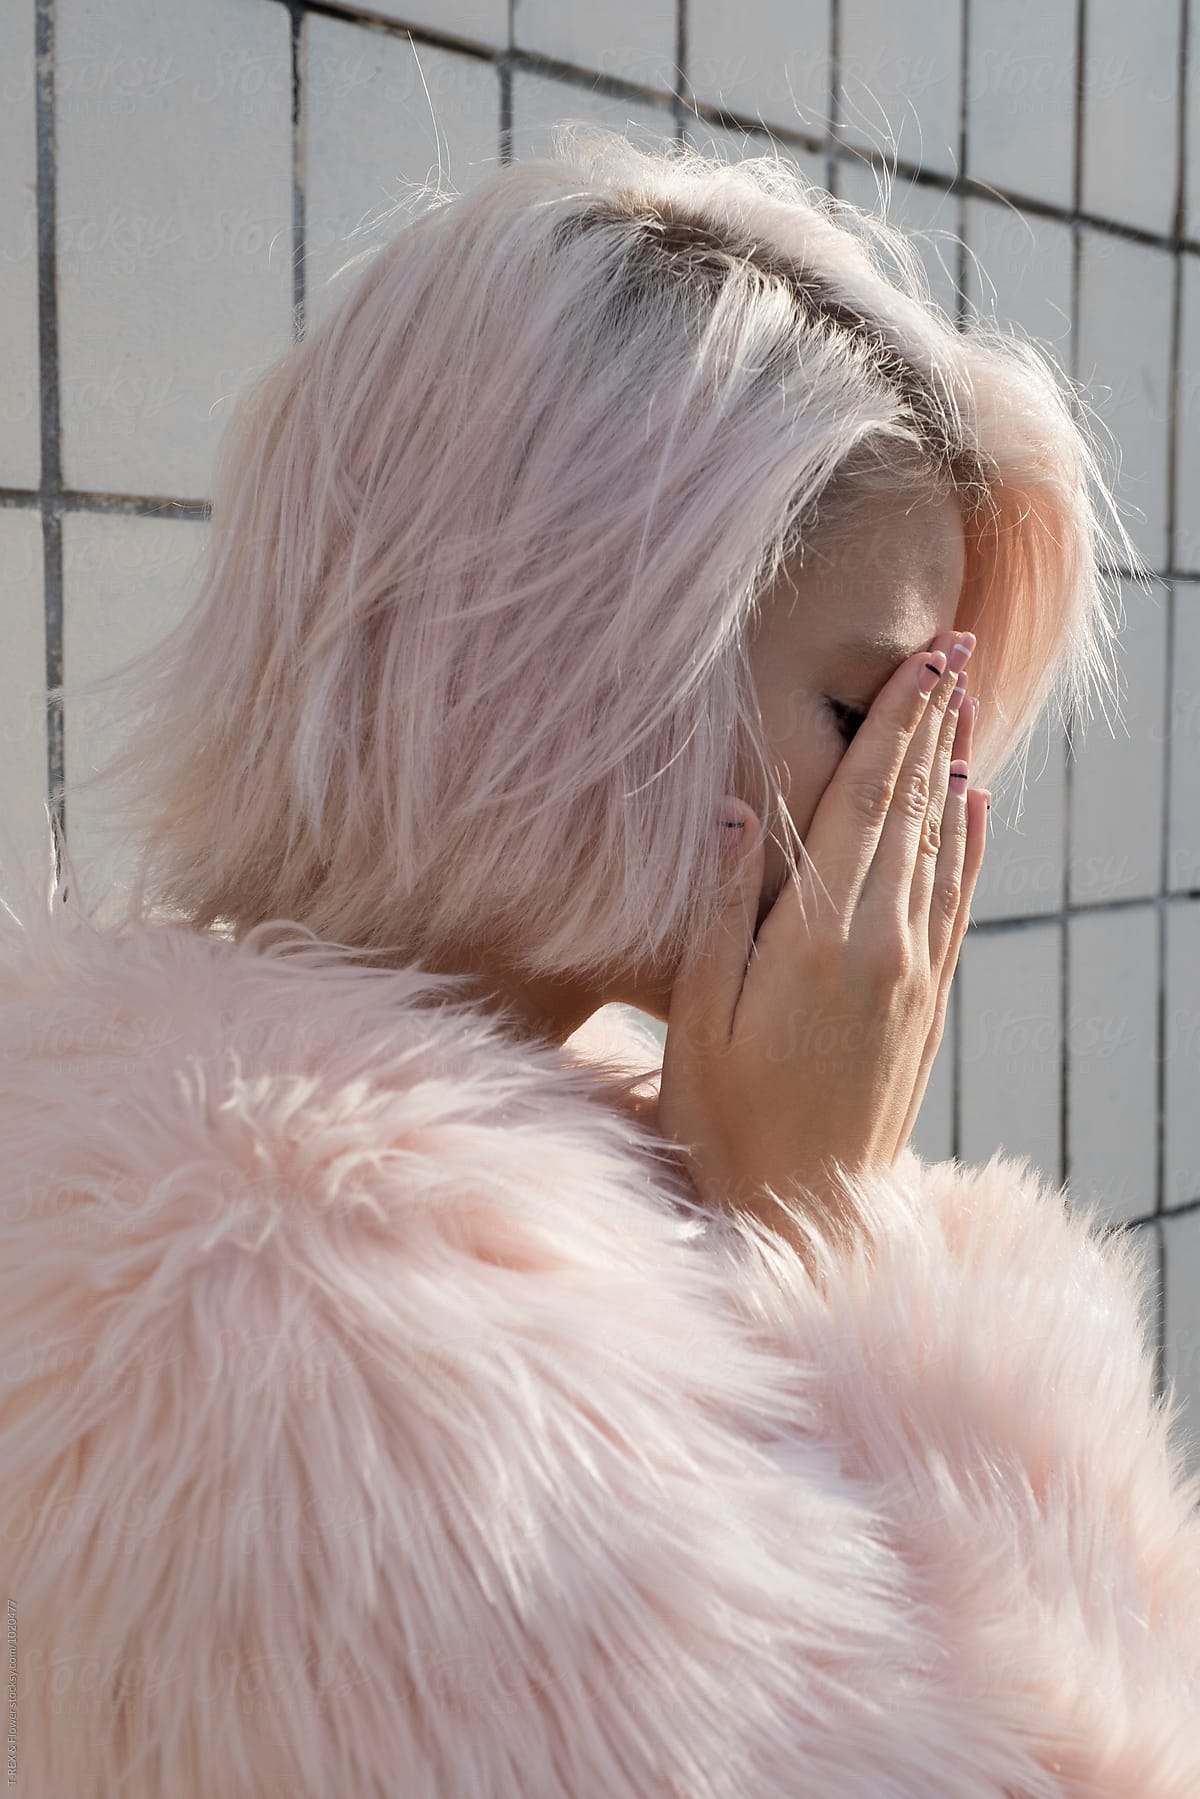 Close-up of sad blonde girl covering face with hands